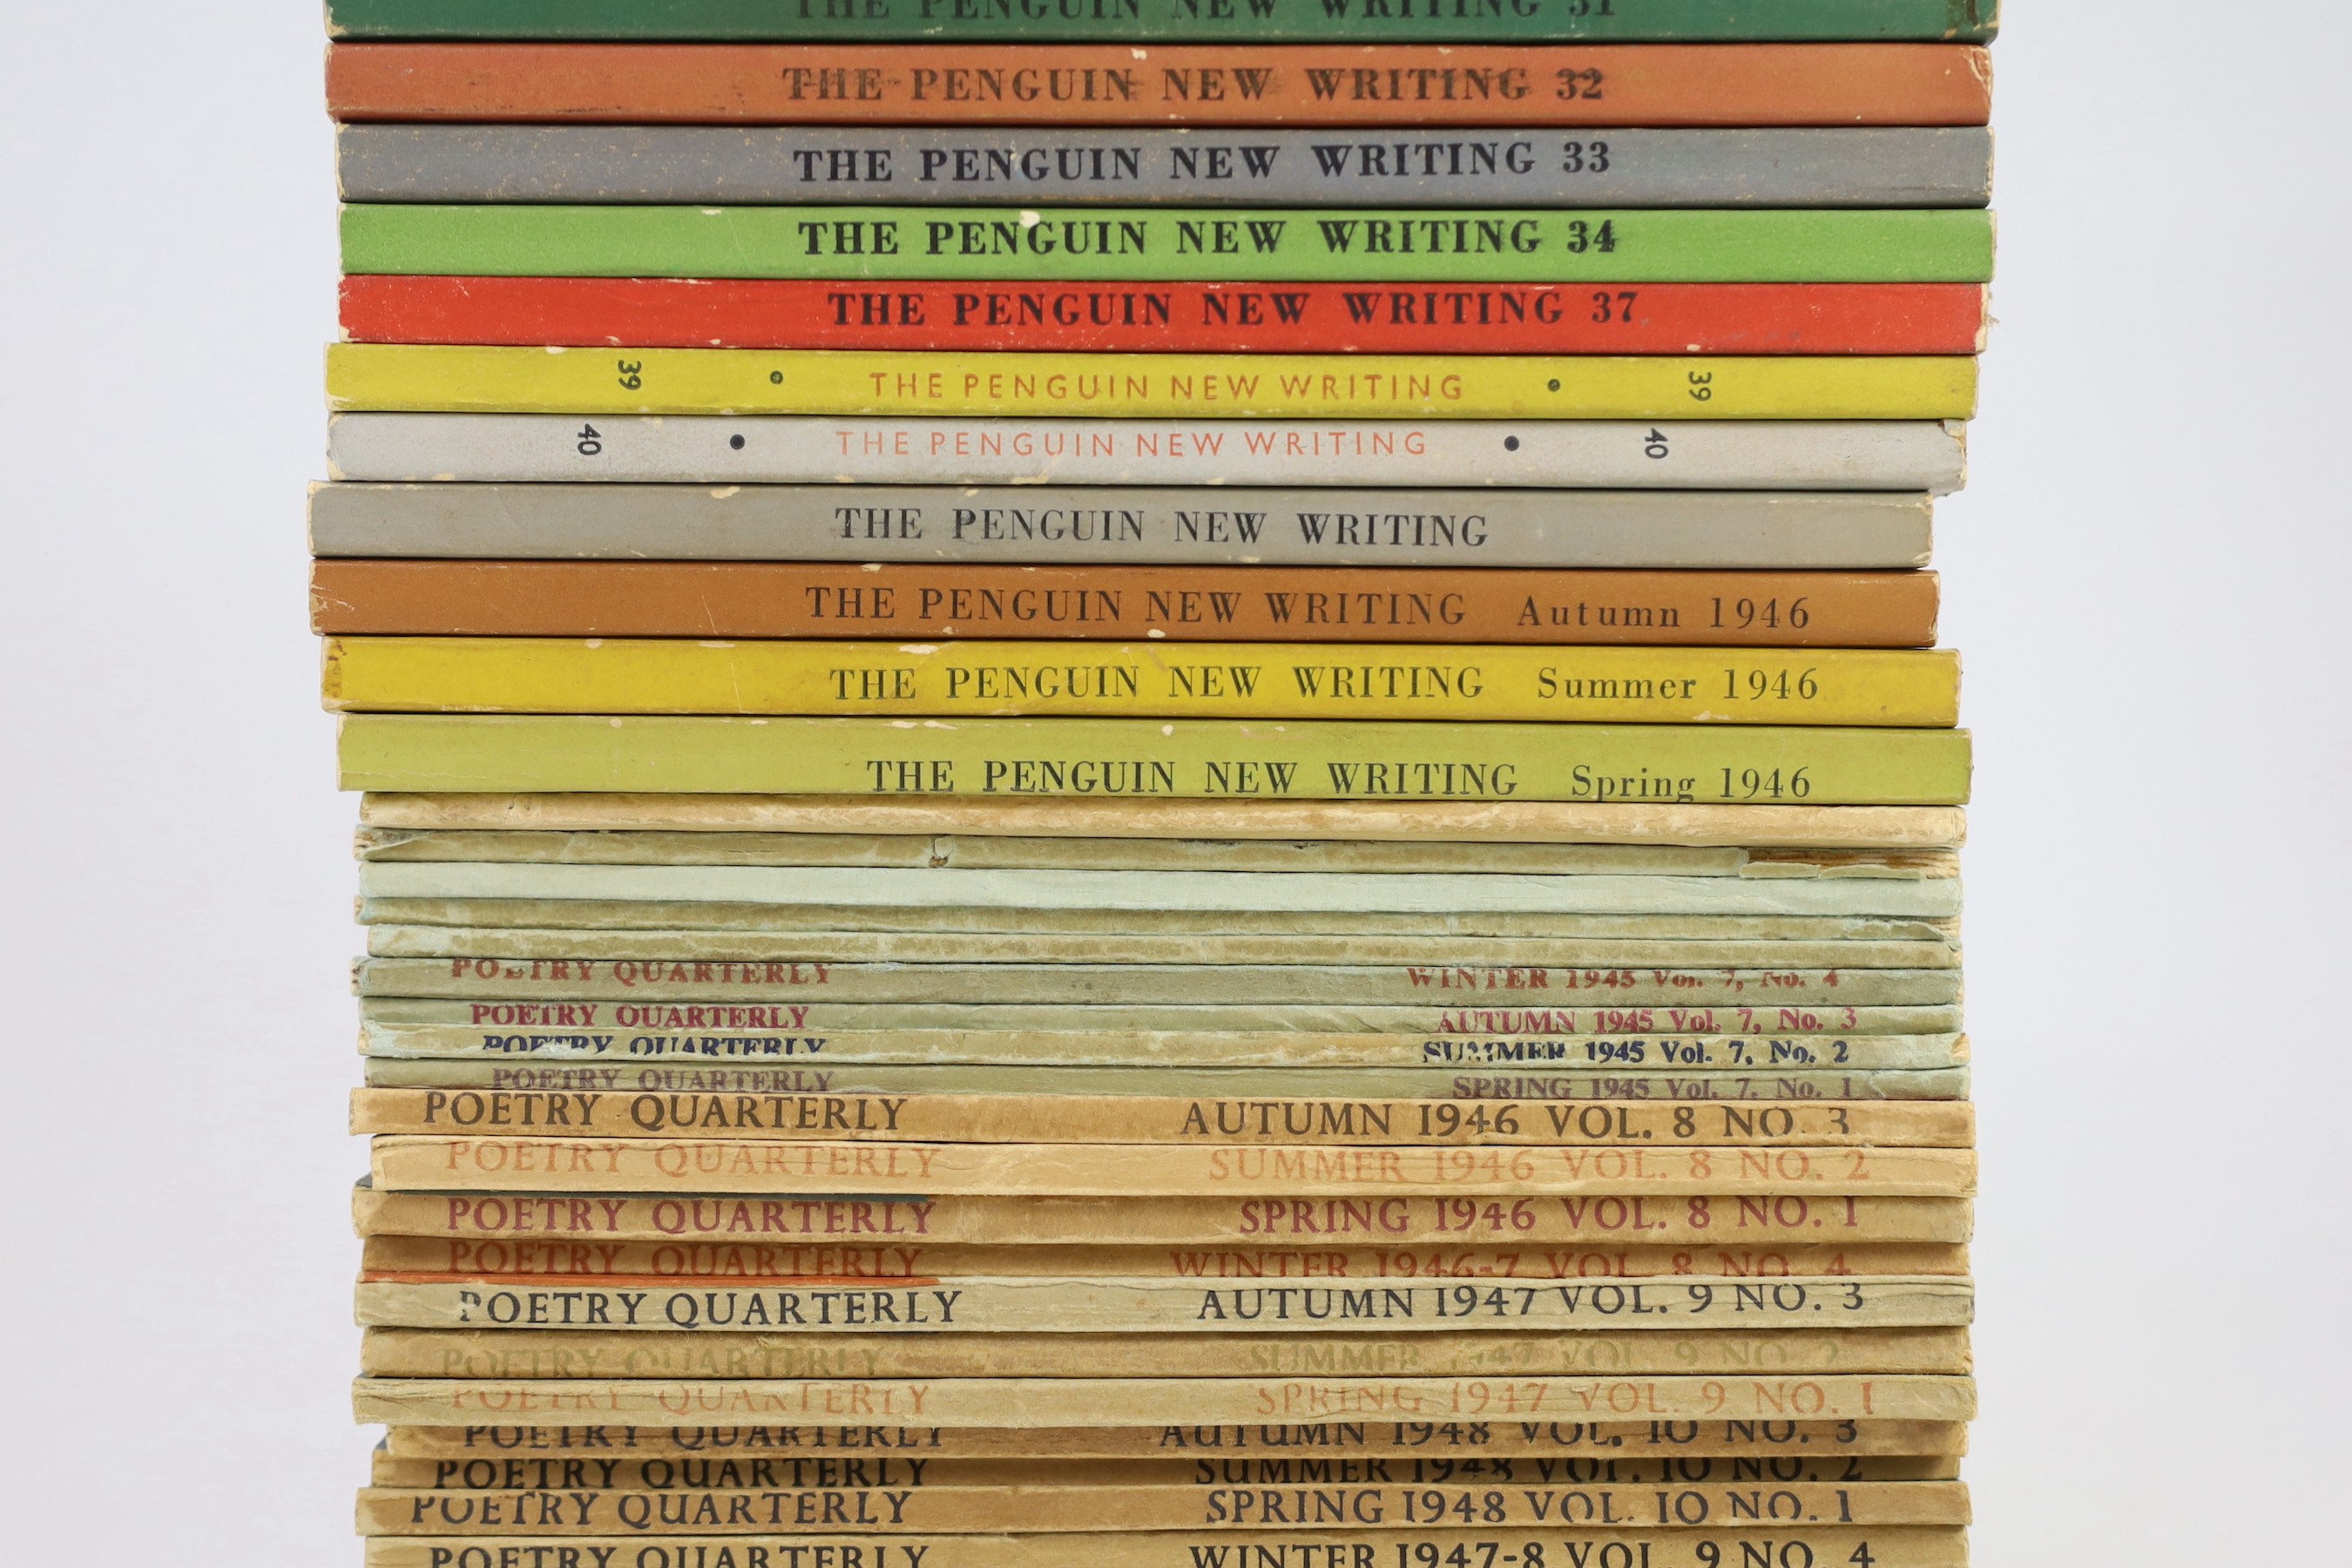 20th century Poetry and Prose - Gardiner, Wrey (editor) - Poetry Quarterly, 35 issues - 1942 Summer; 1943 Winter; 1944 Summer, Autumn, Winter; 1945, 1947-49,1951-52, Spring, Summer, Autumn, Winter; 1946 & 1950 Spring, Su